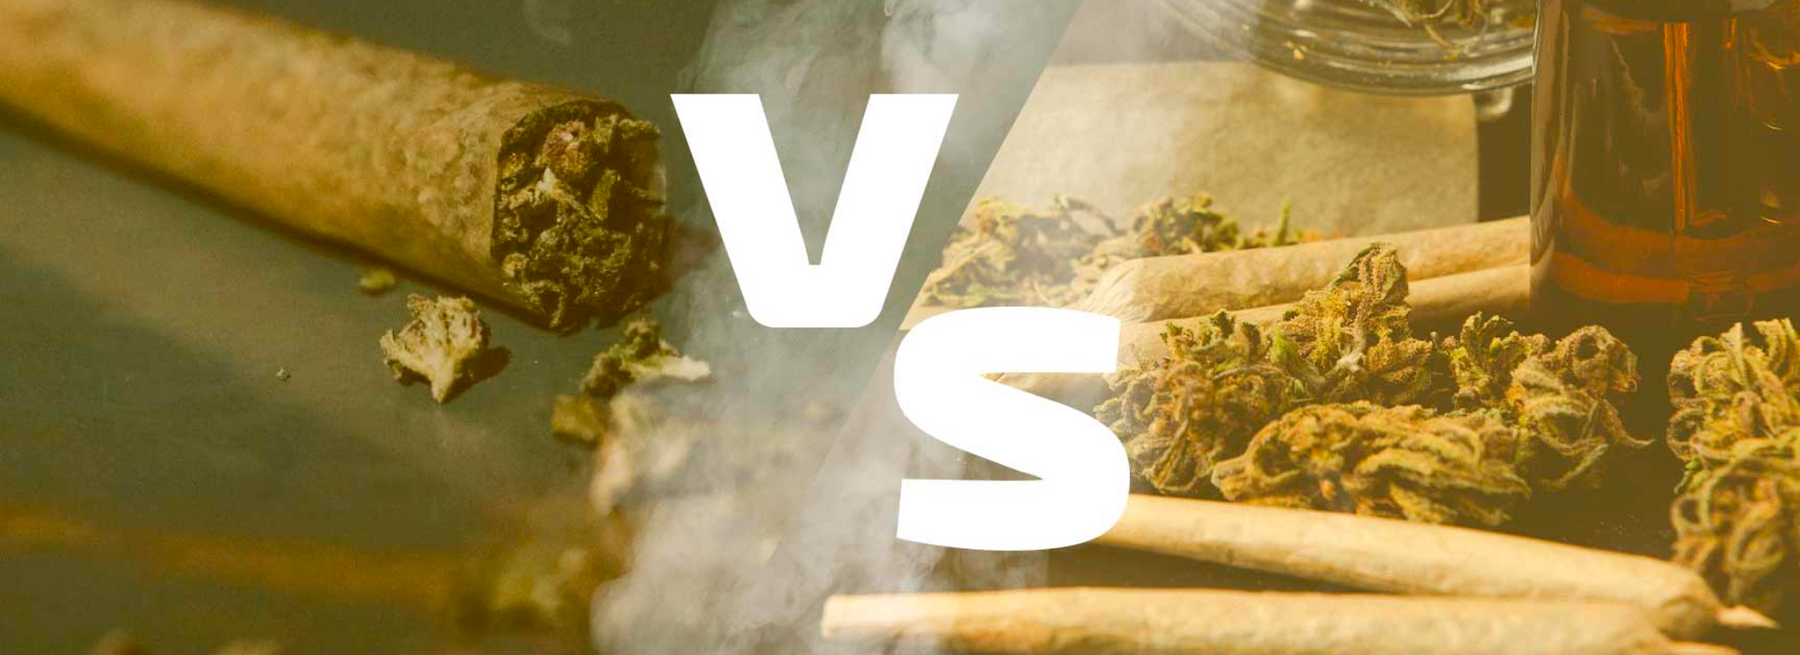 Difference between spliffs, blunts, and joints